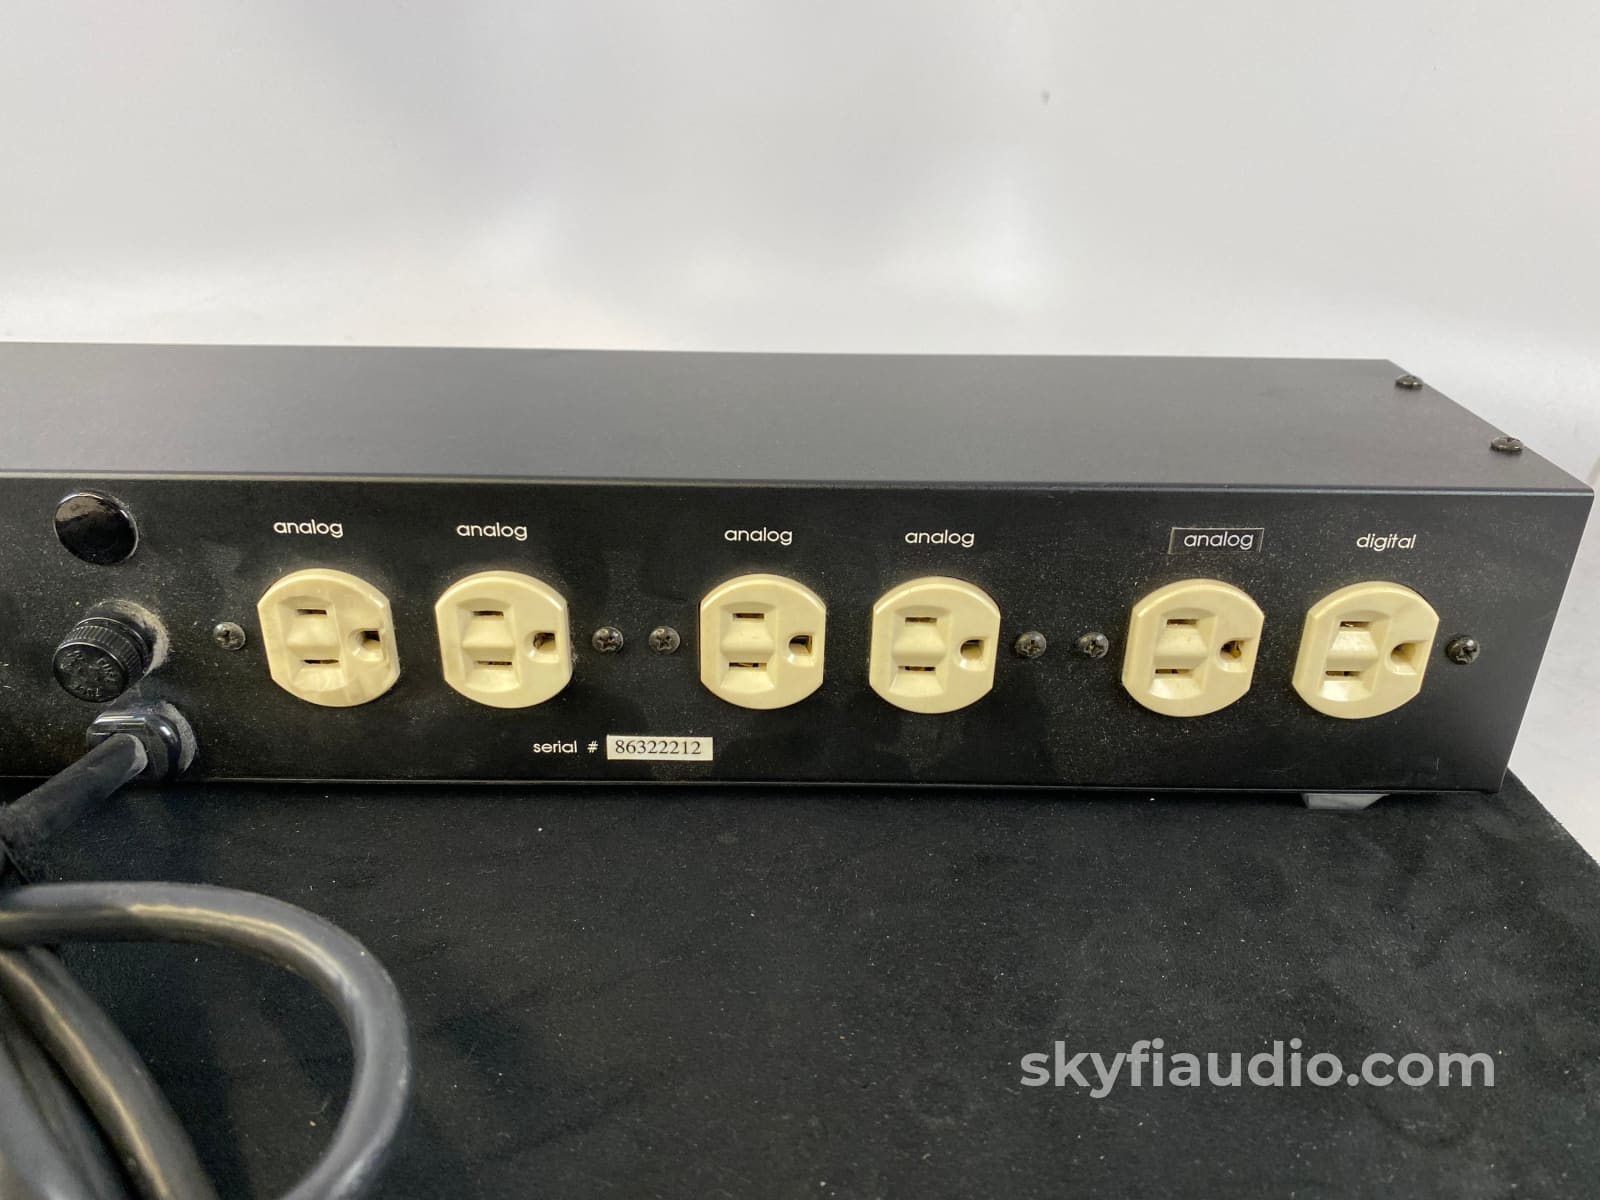 Michael Chang Lightspeed Cls 3200 Audiophile Power Conditioner